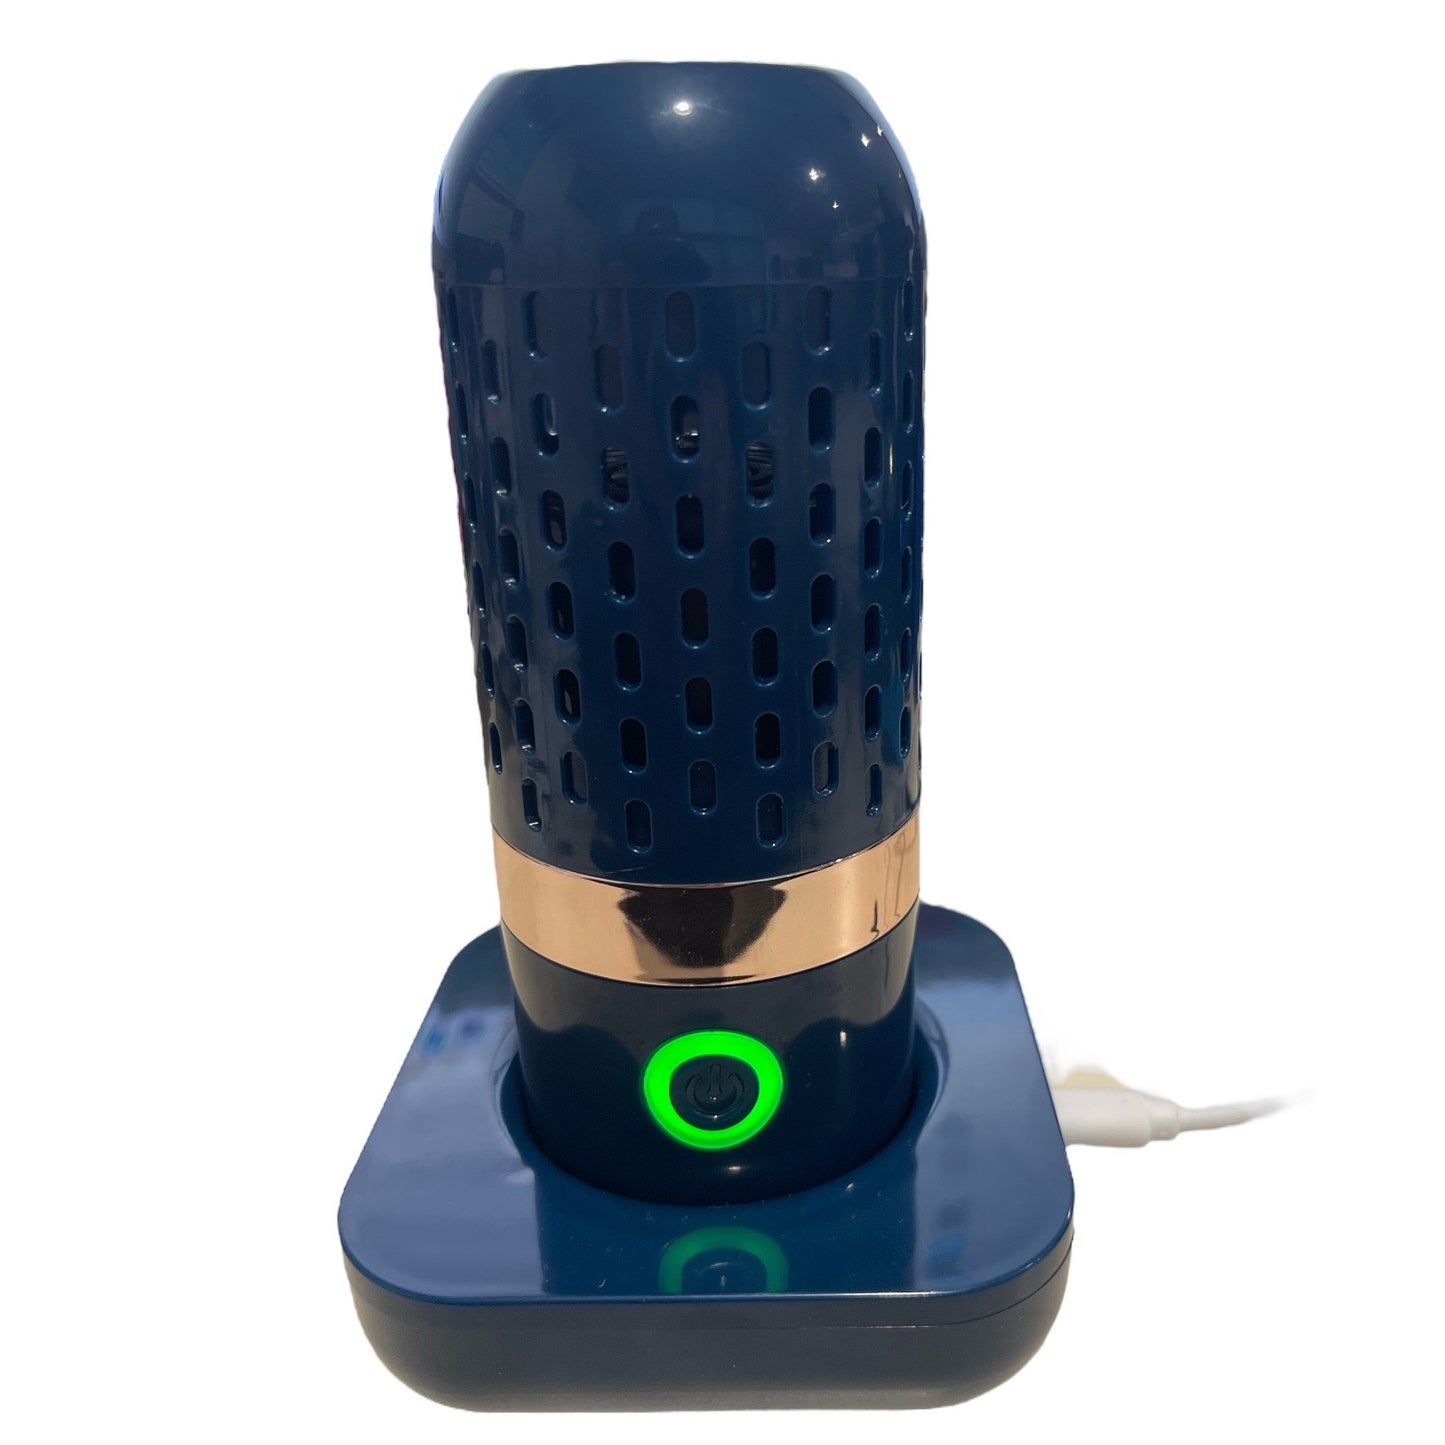 Protect yourself from food poisoning with the Portable Vegetable Purifier Disinfectant Capsule